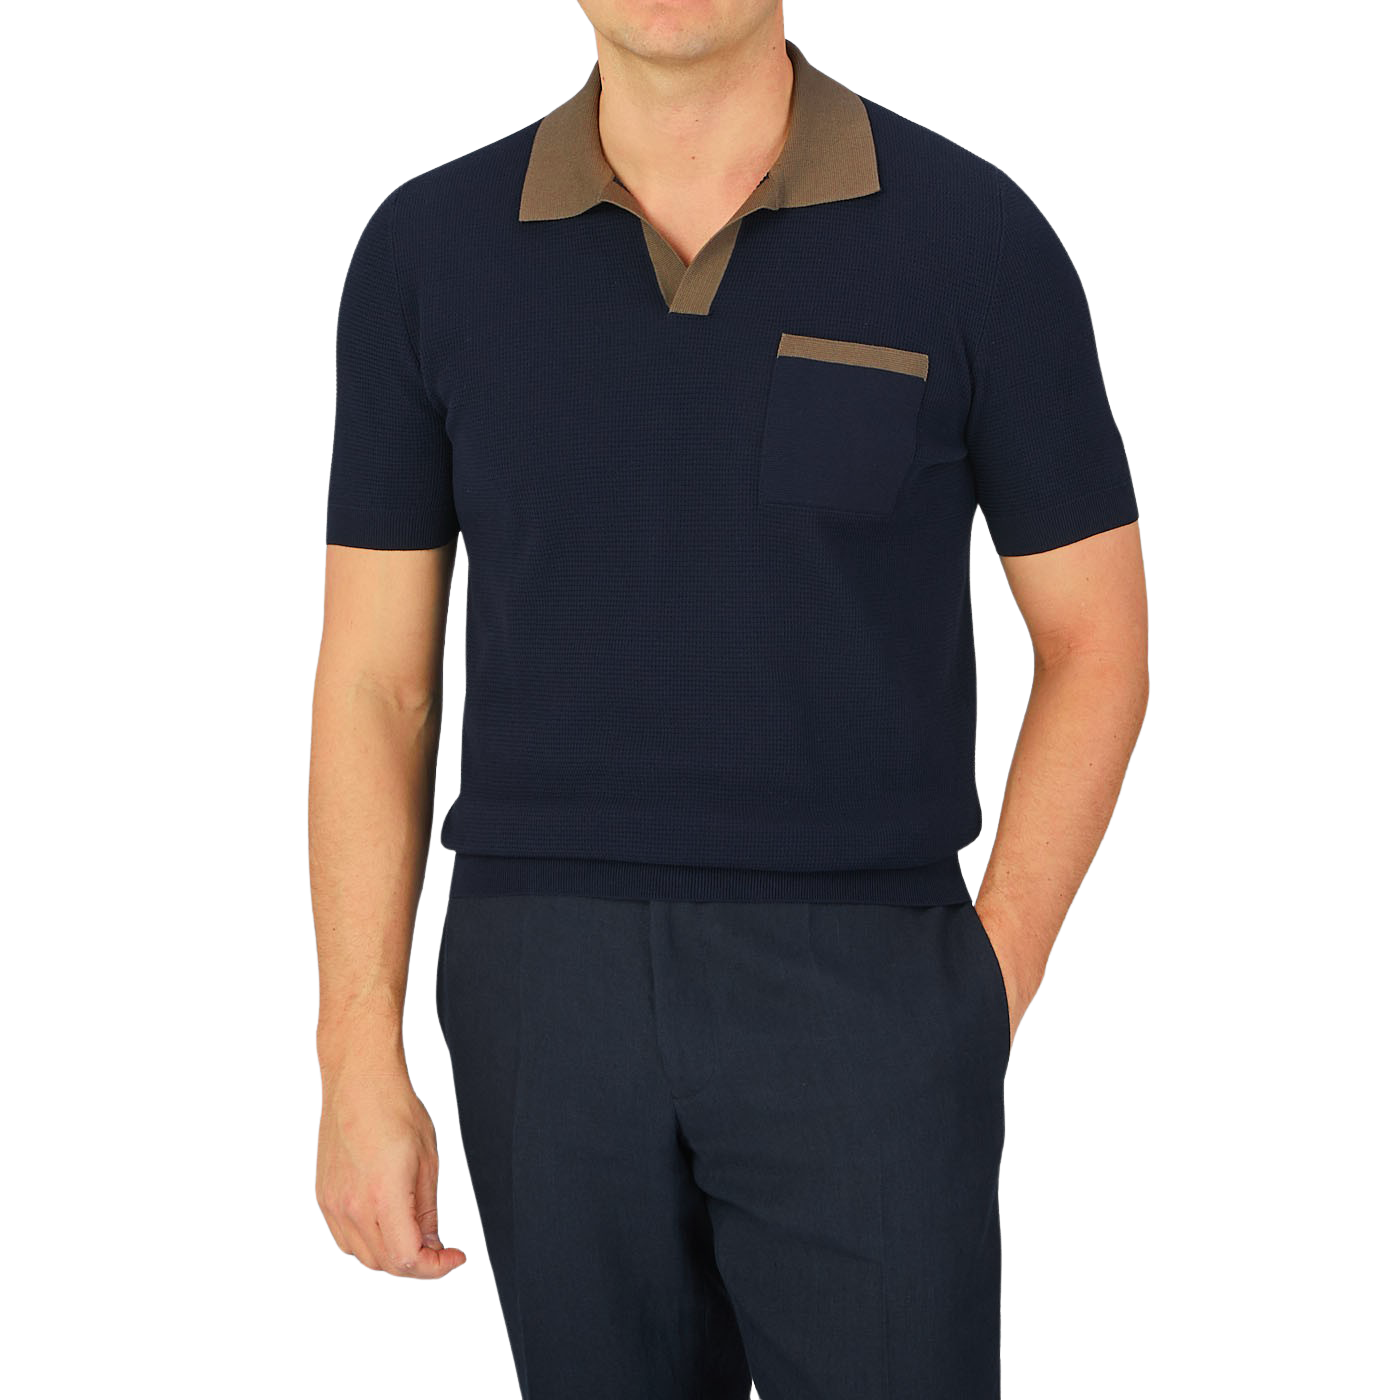 A man wearing a Navy Fresh Cotton Contrast Collar Polo Shirt by Gran Sasso and brown pants made of cotton.